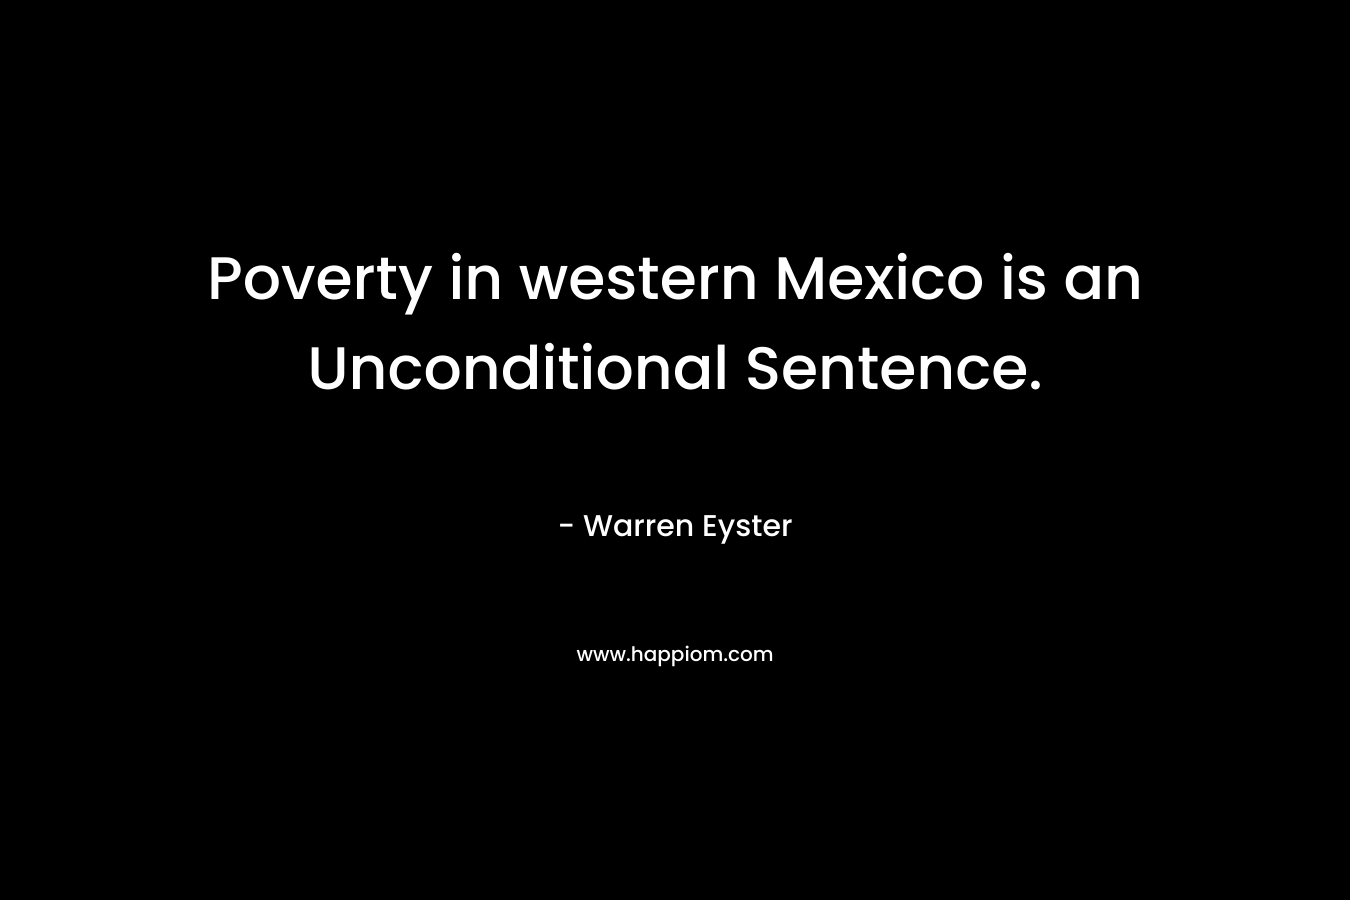 Poverty in western Mexico is an Unconditional Sentence. – Warren Eyster